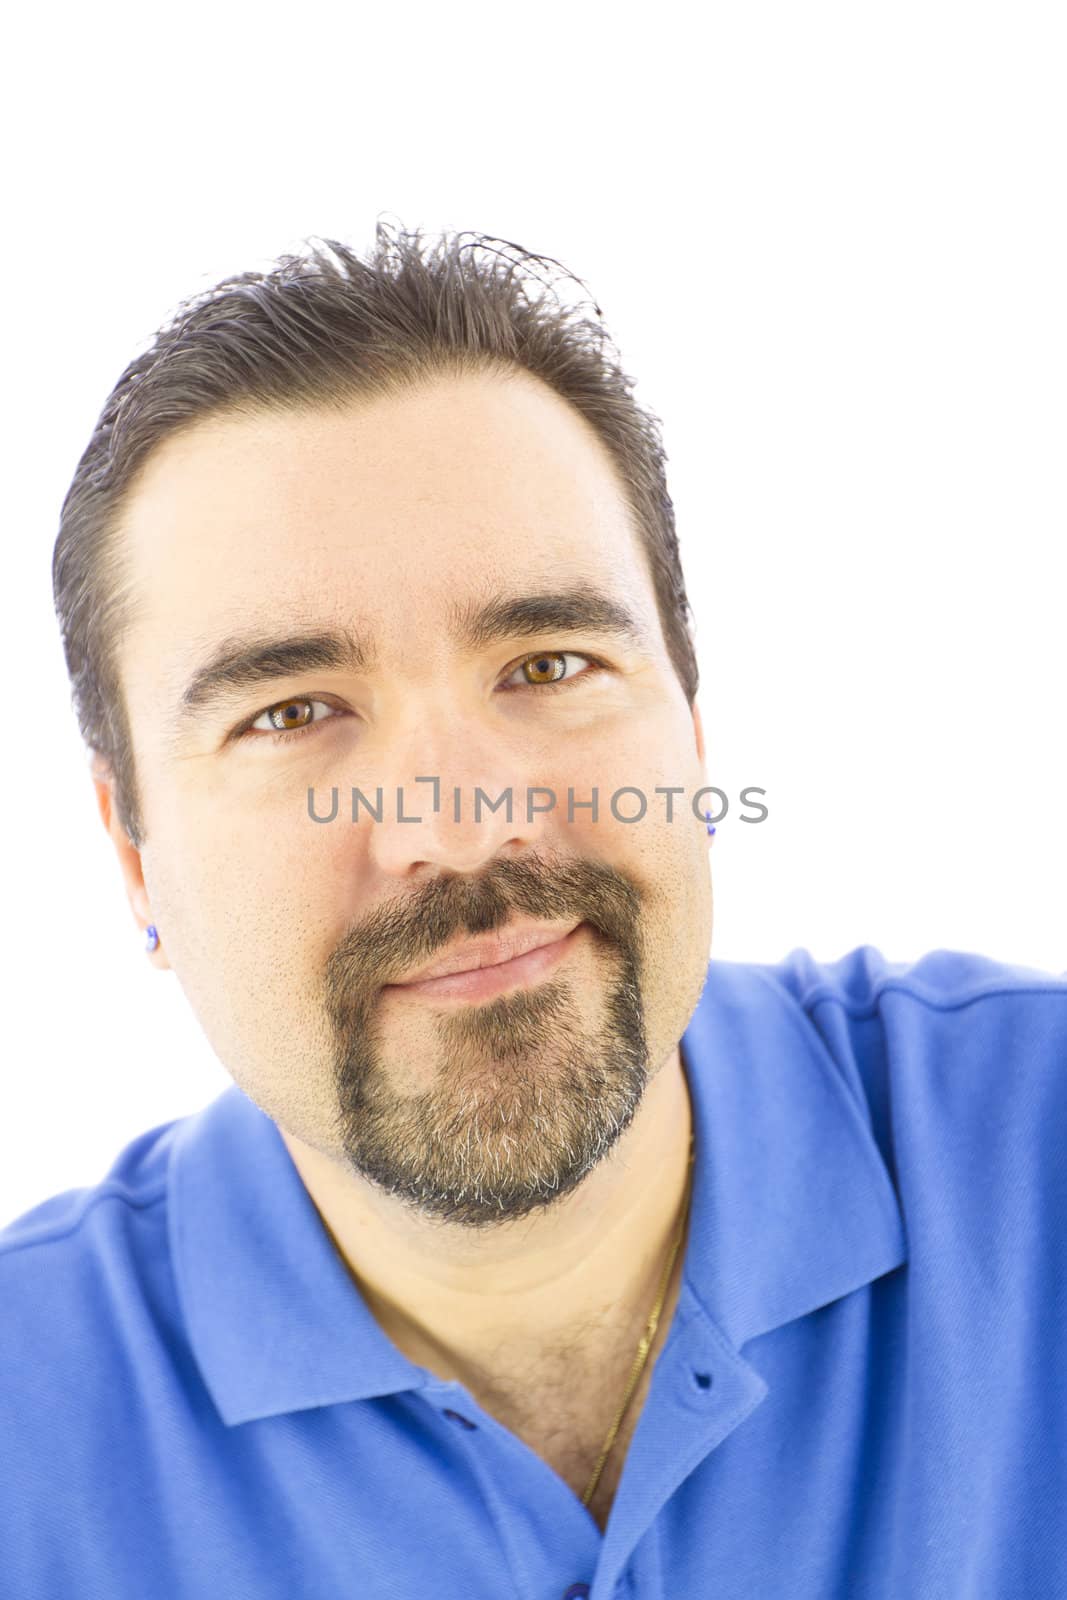 Positively smiling man with goatee and blue shirt.